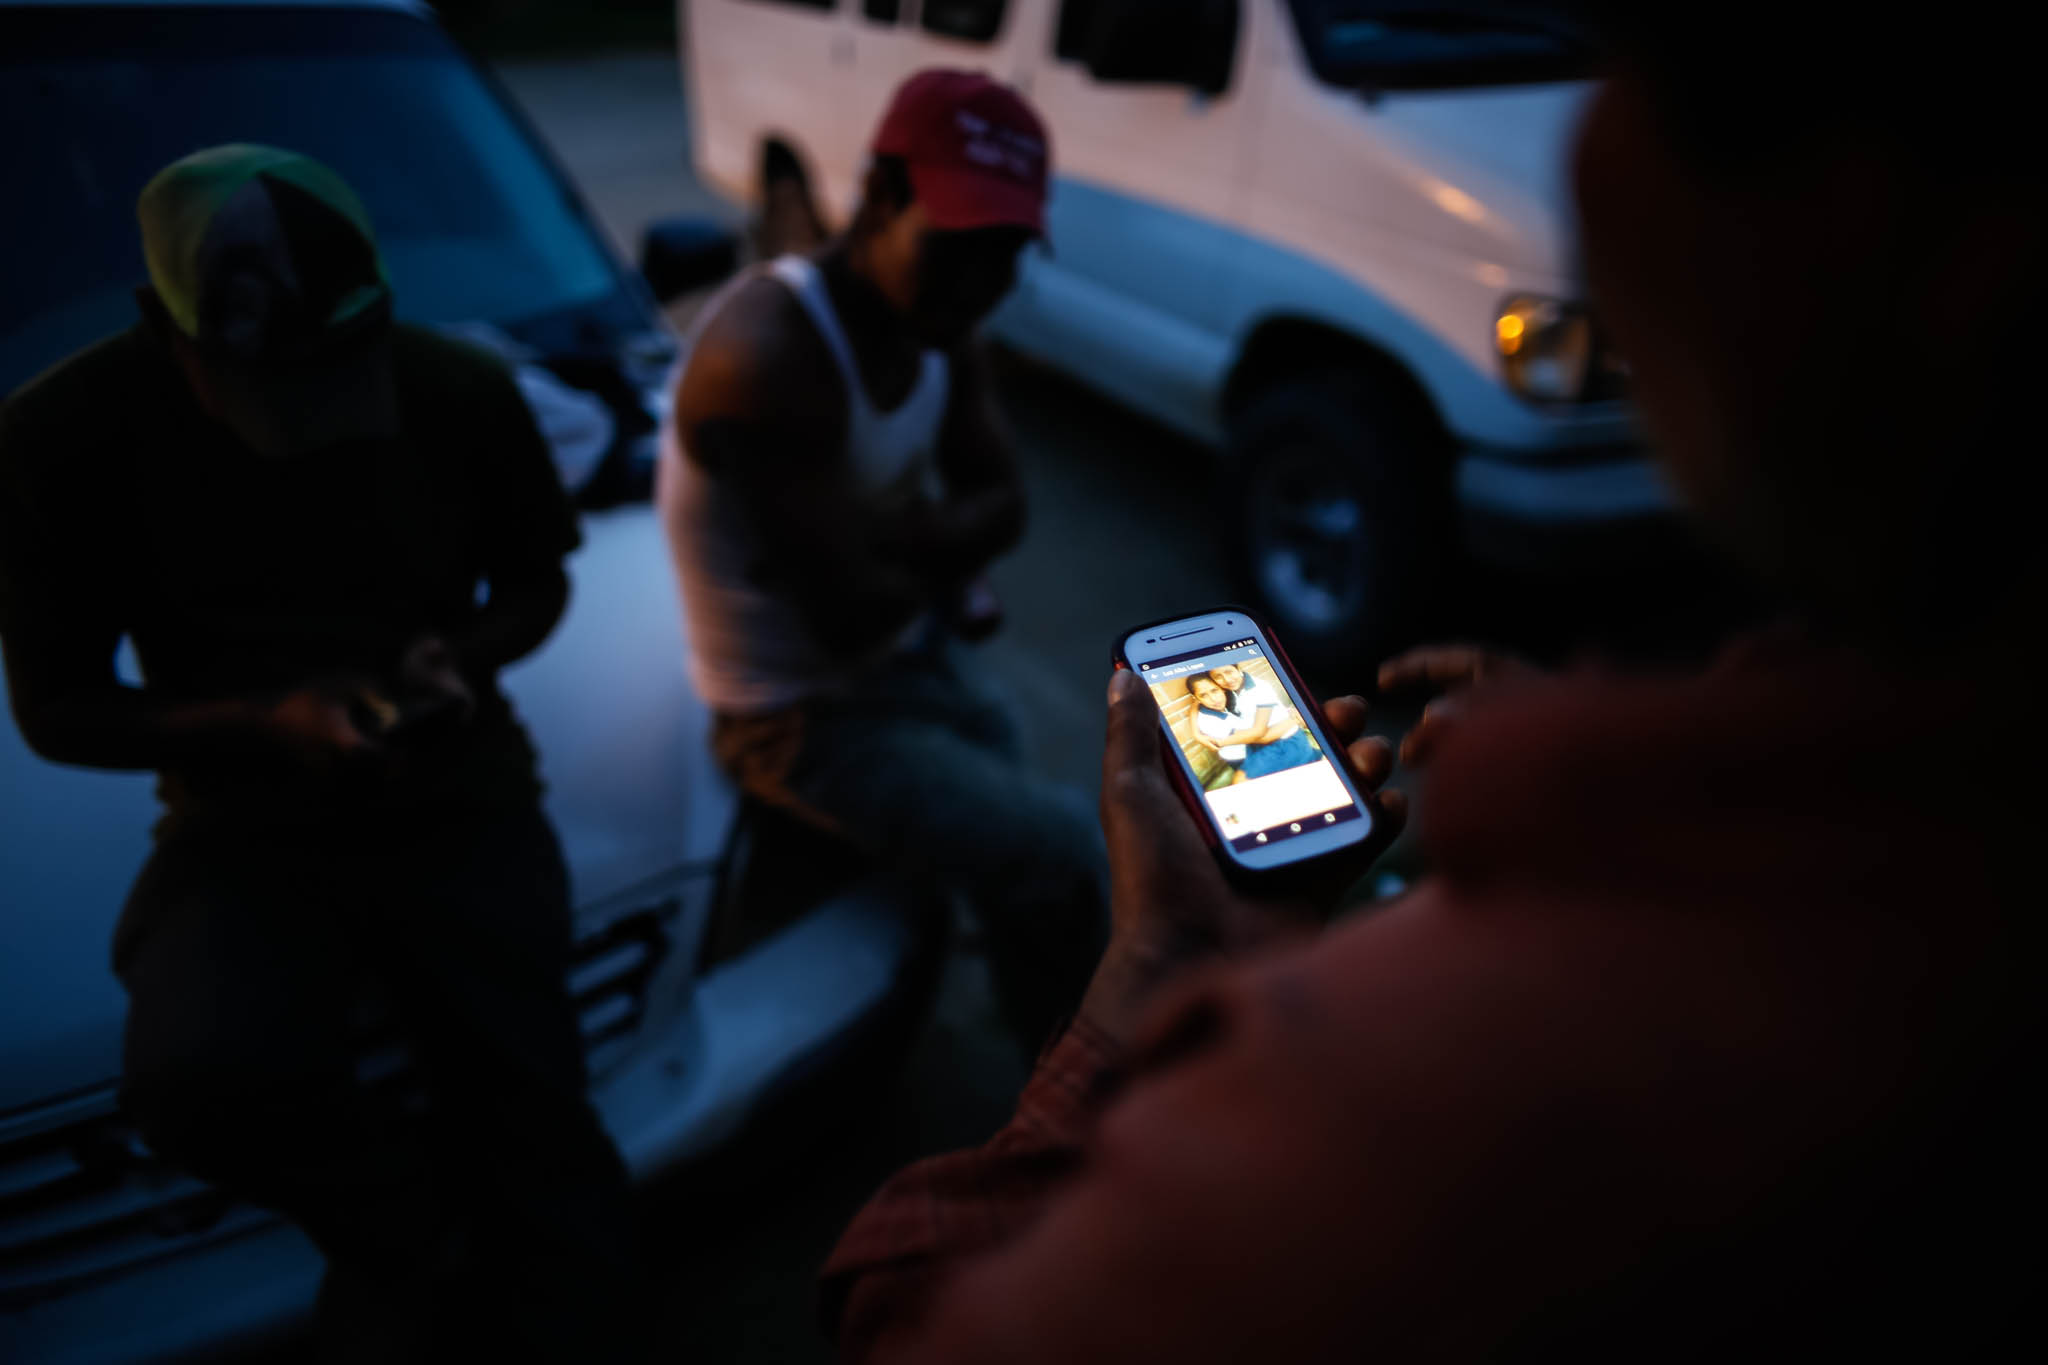  Benjamin Cruz Perez, 42, views a photo of his family in Mexico in front of the apartment he shares with fellow migrant workers. 